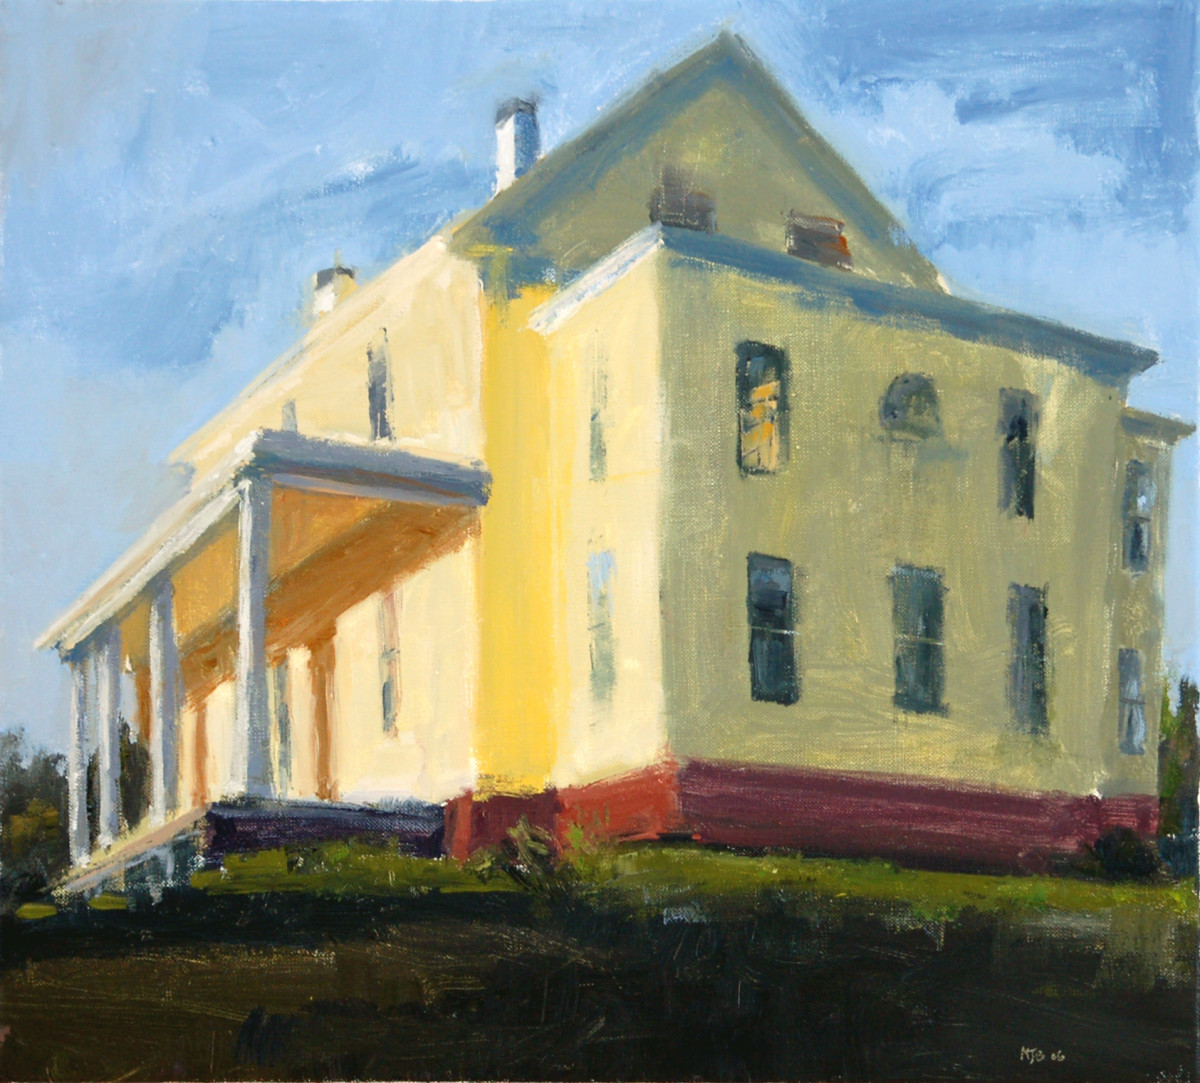 The Yellow House by MJ Blanchette 